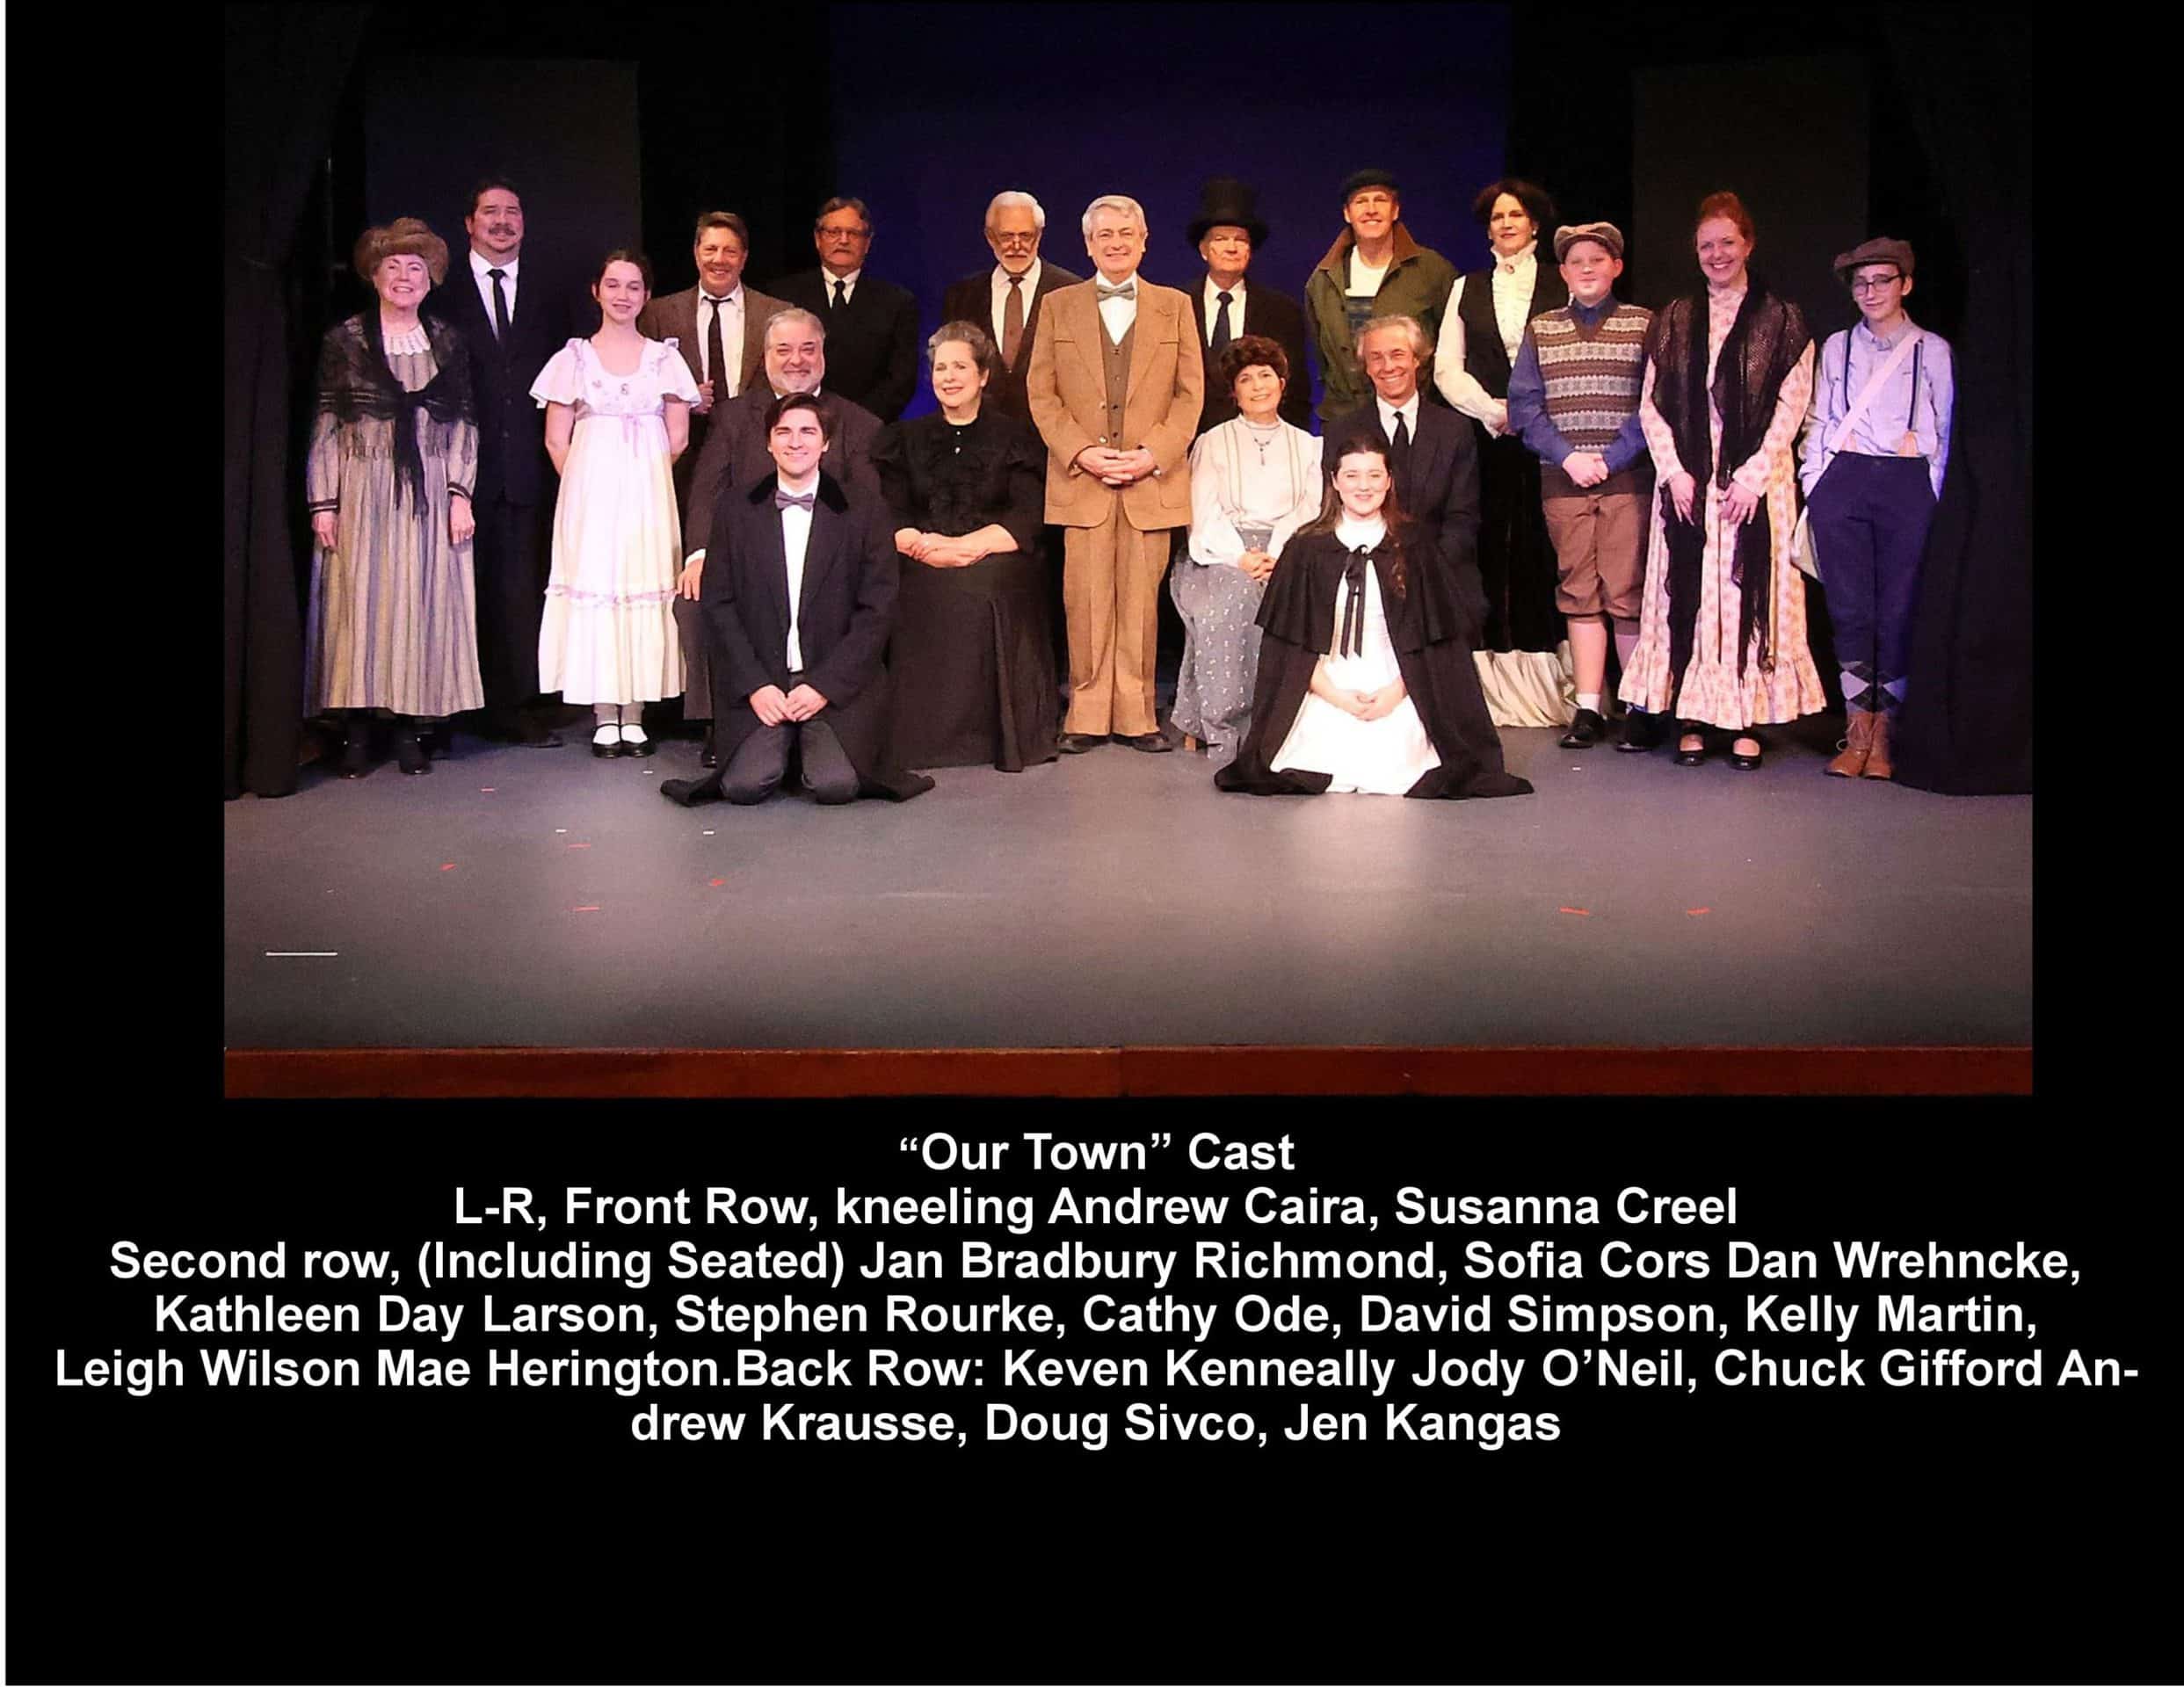 Our Town by Thornton Wilder